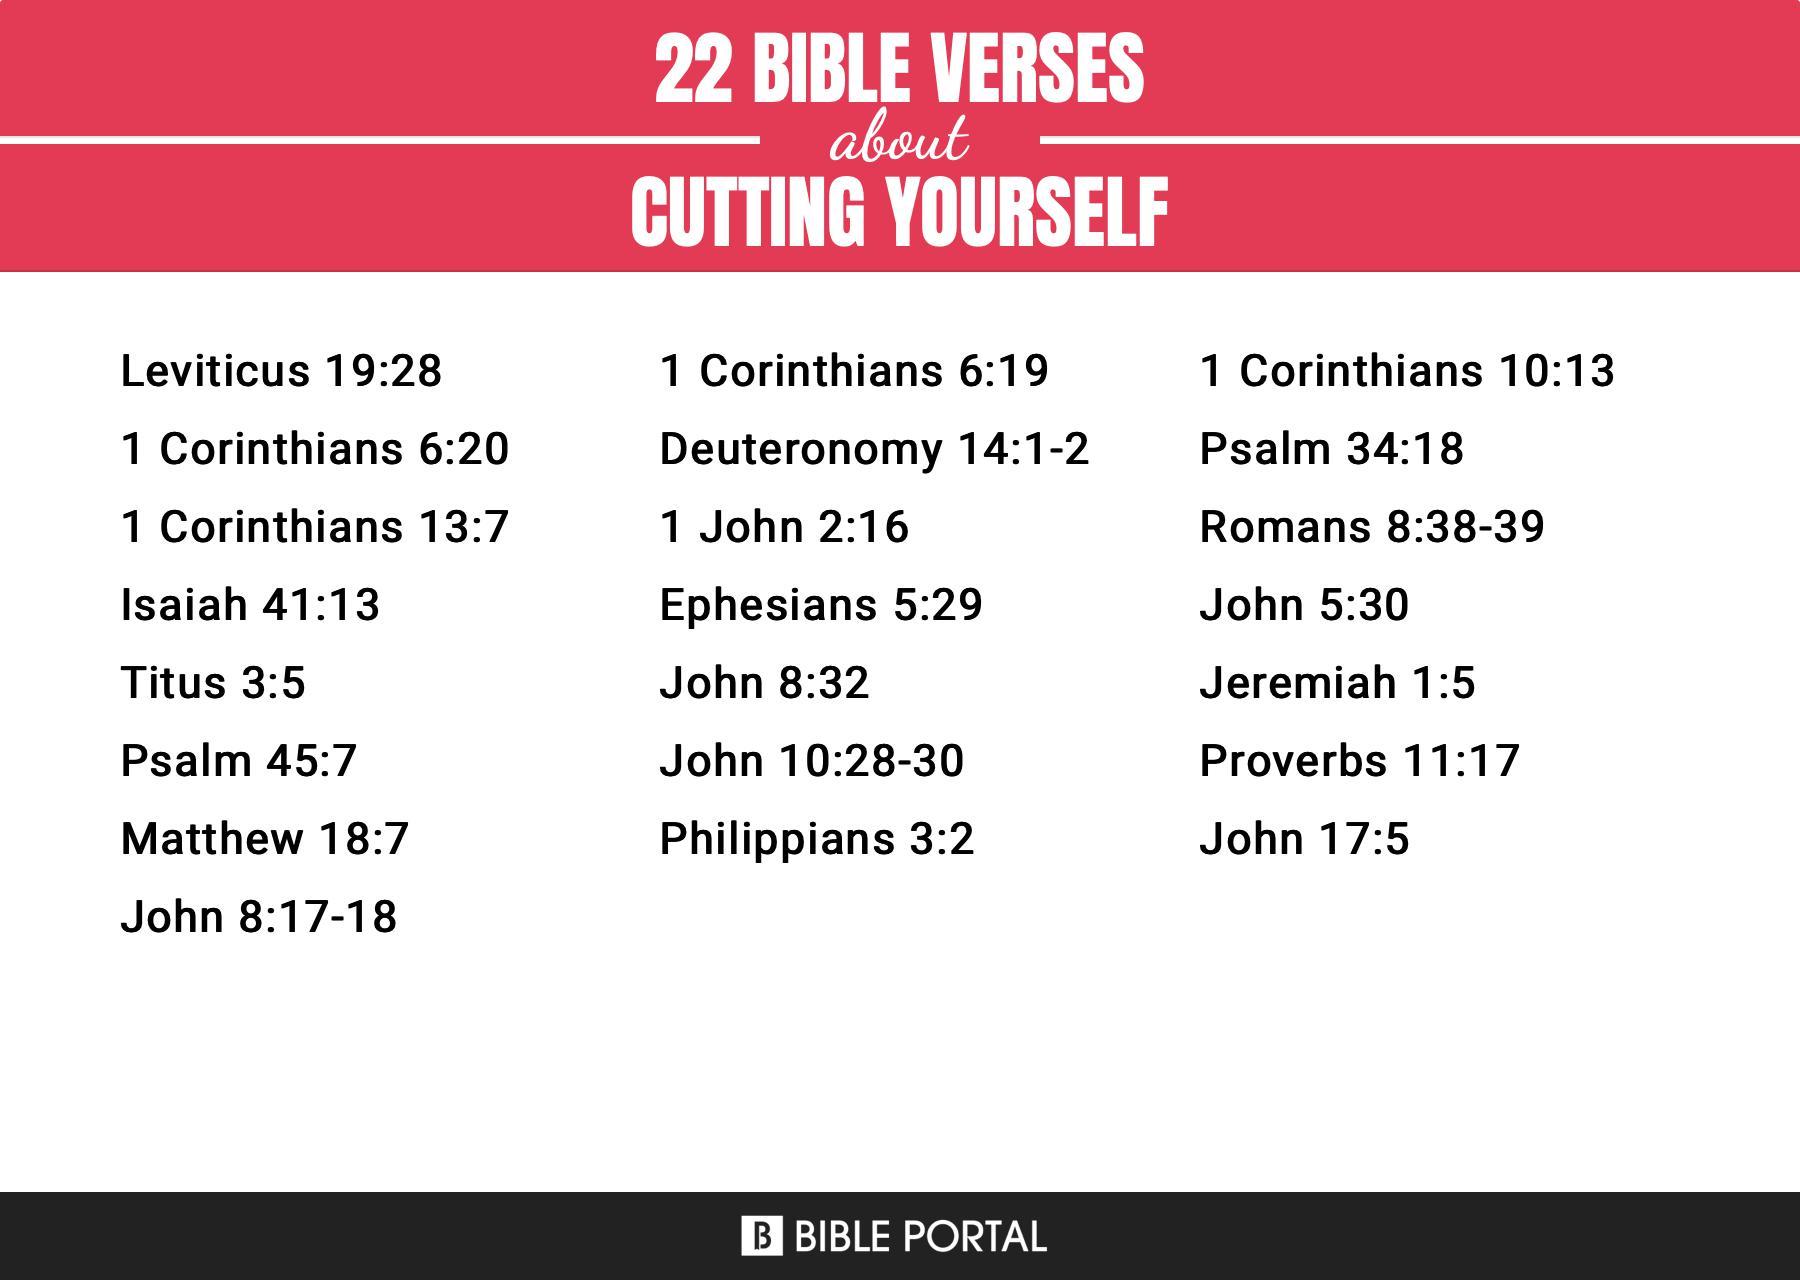 22 Bible Verses about Cutting Yourself